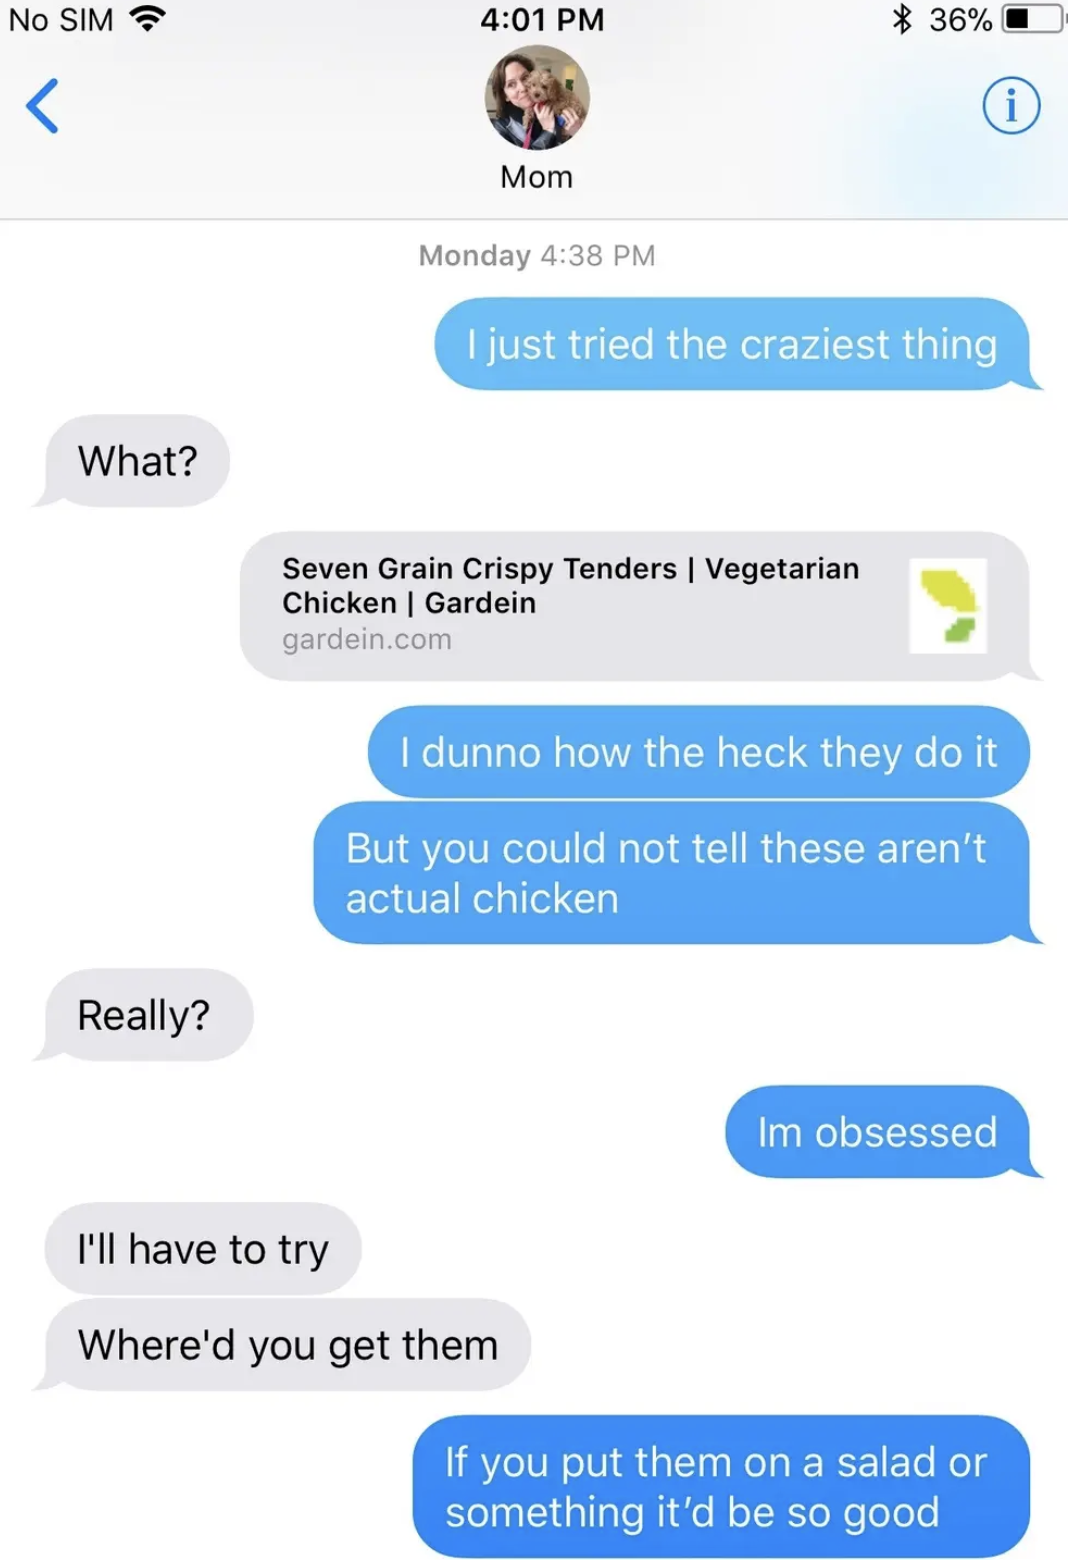 A daughter texting her mom about an exciting new recipe